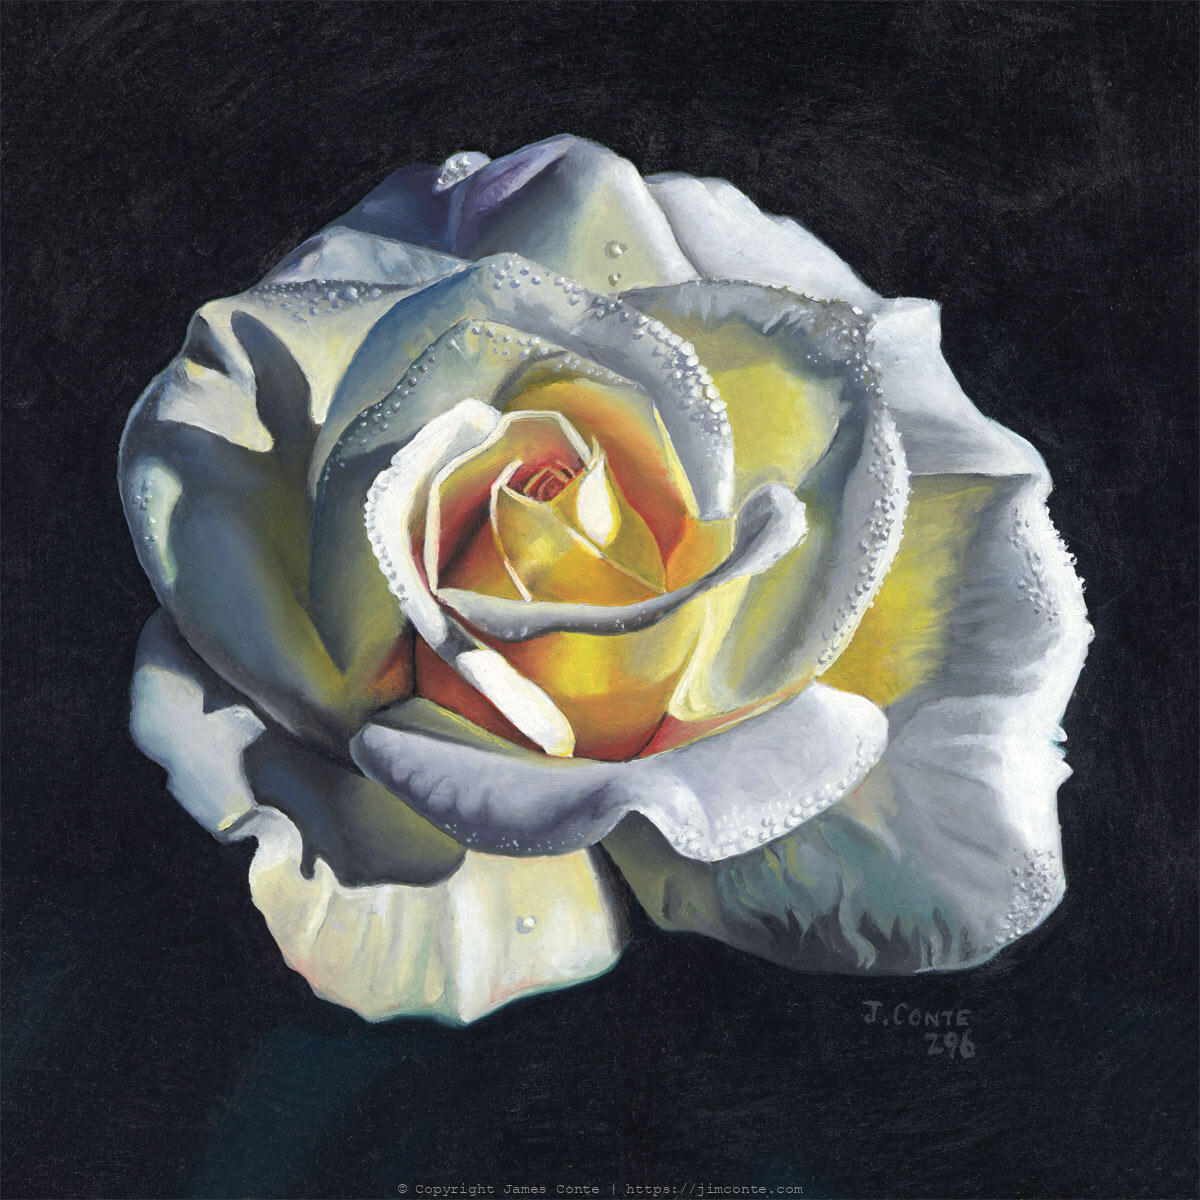 A painting of a rose